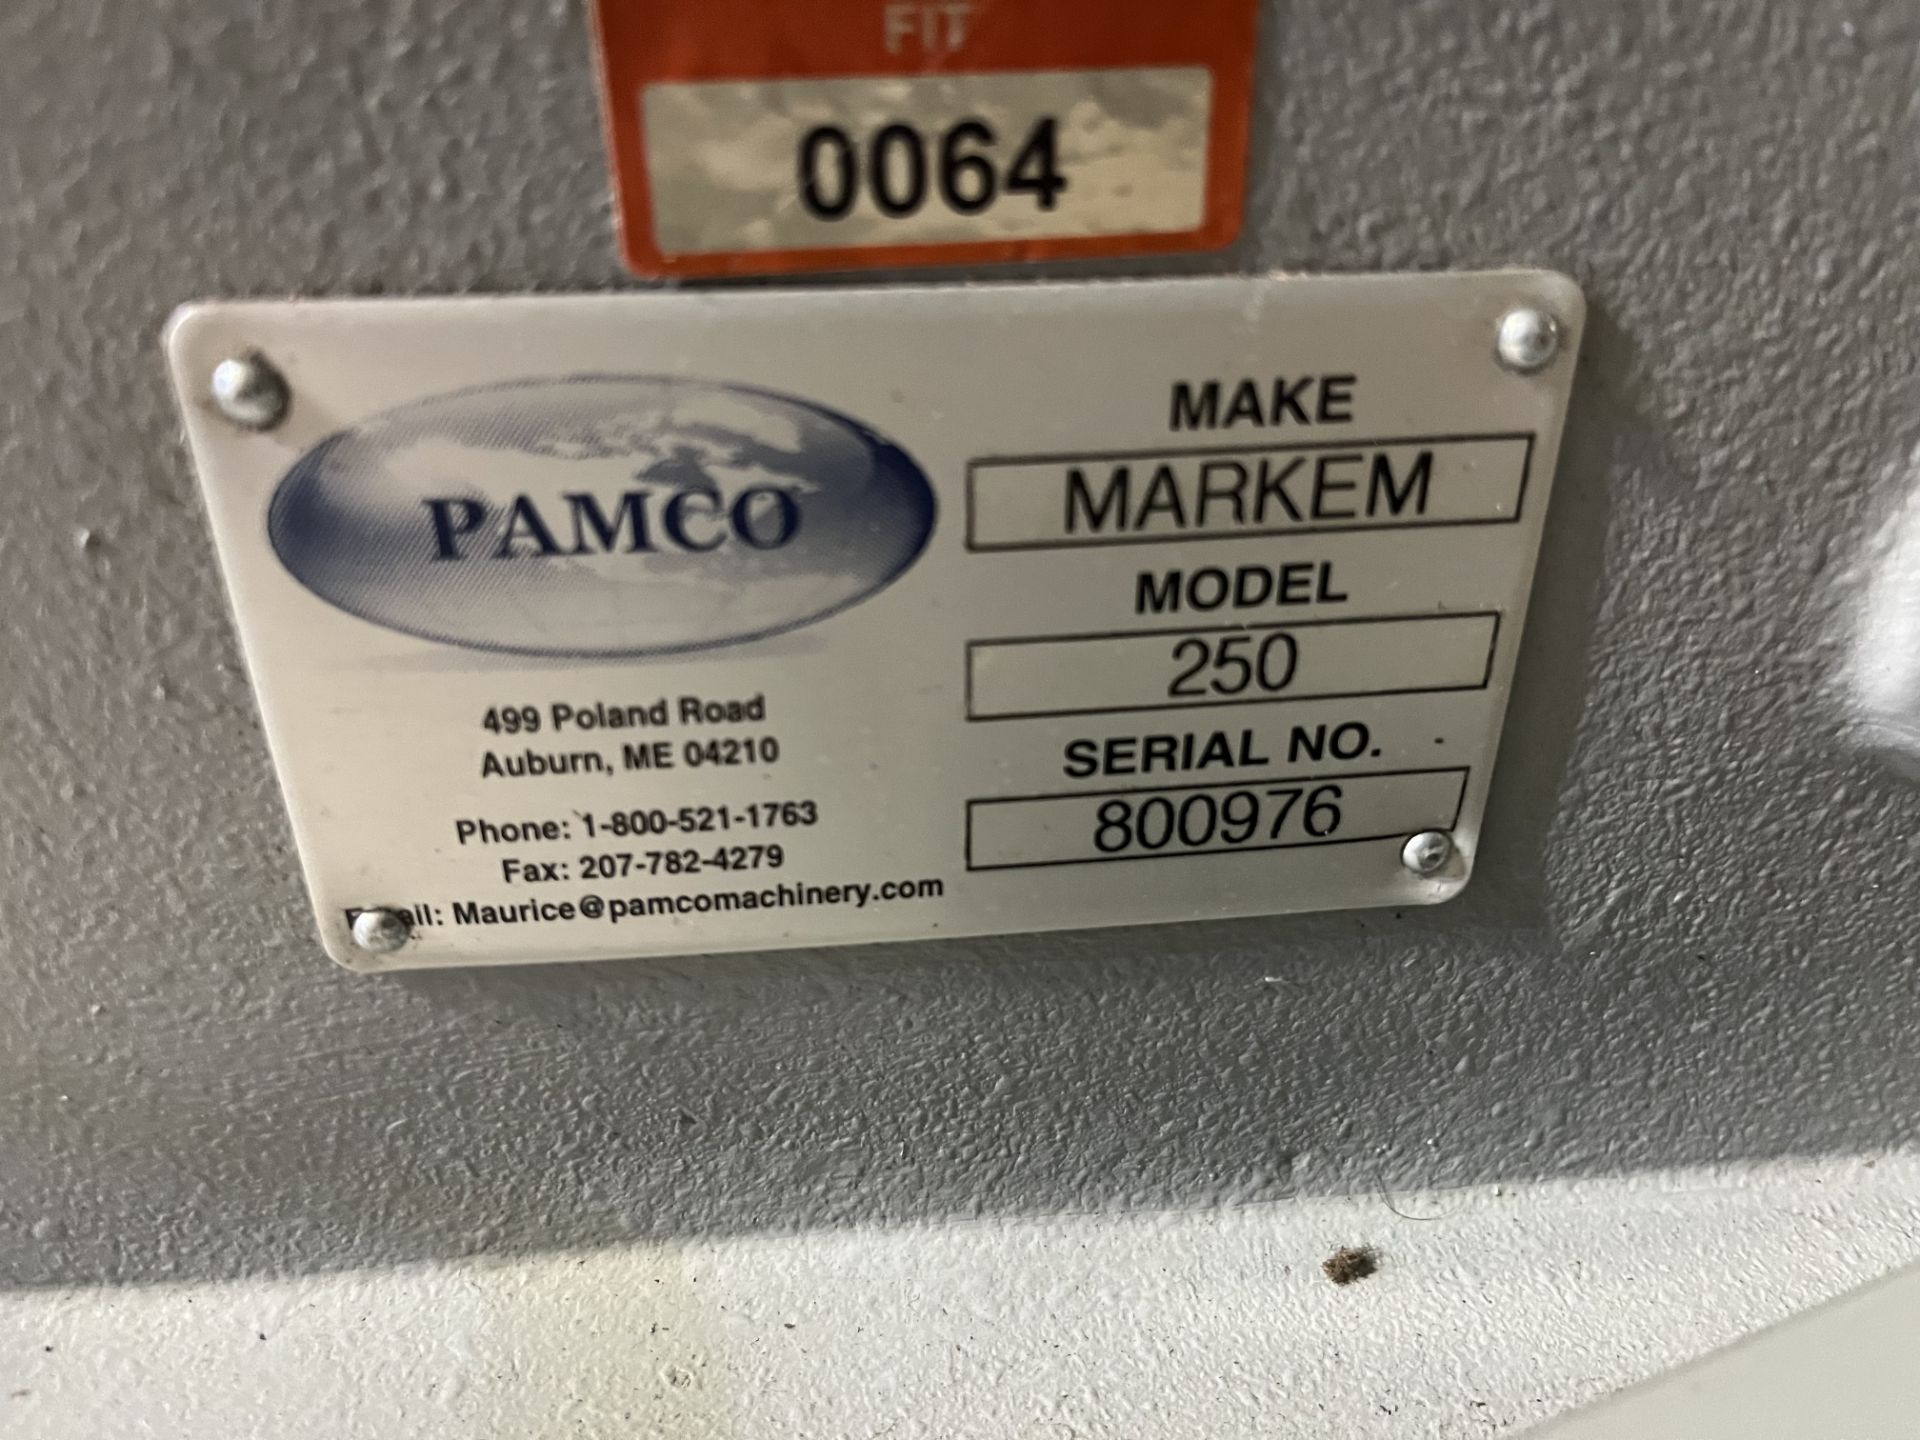 Pamco Markem 250 Foil embosser S/N 800976, in Good, Working Condition, Weight = 313 lbs, with - Bild 6 aus 10